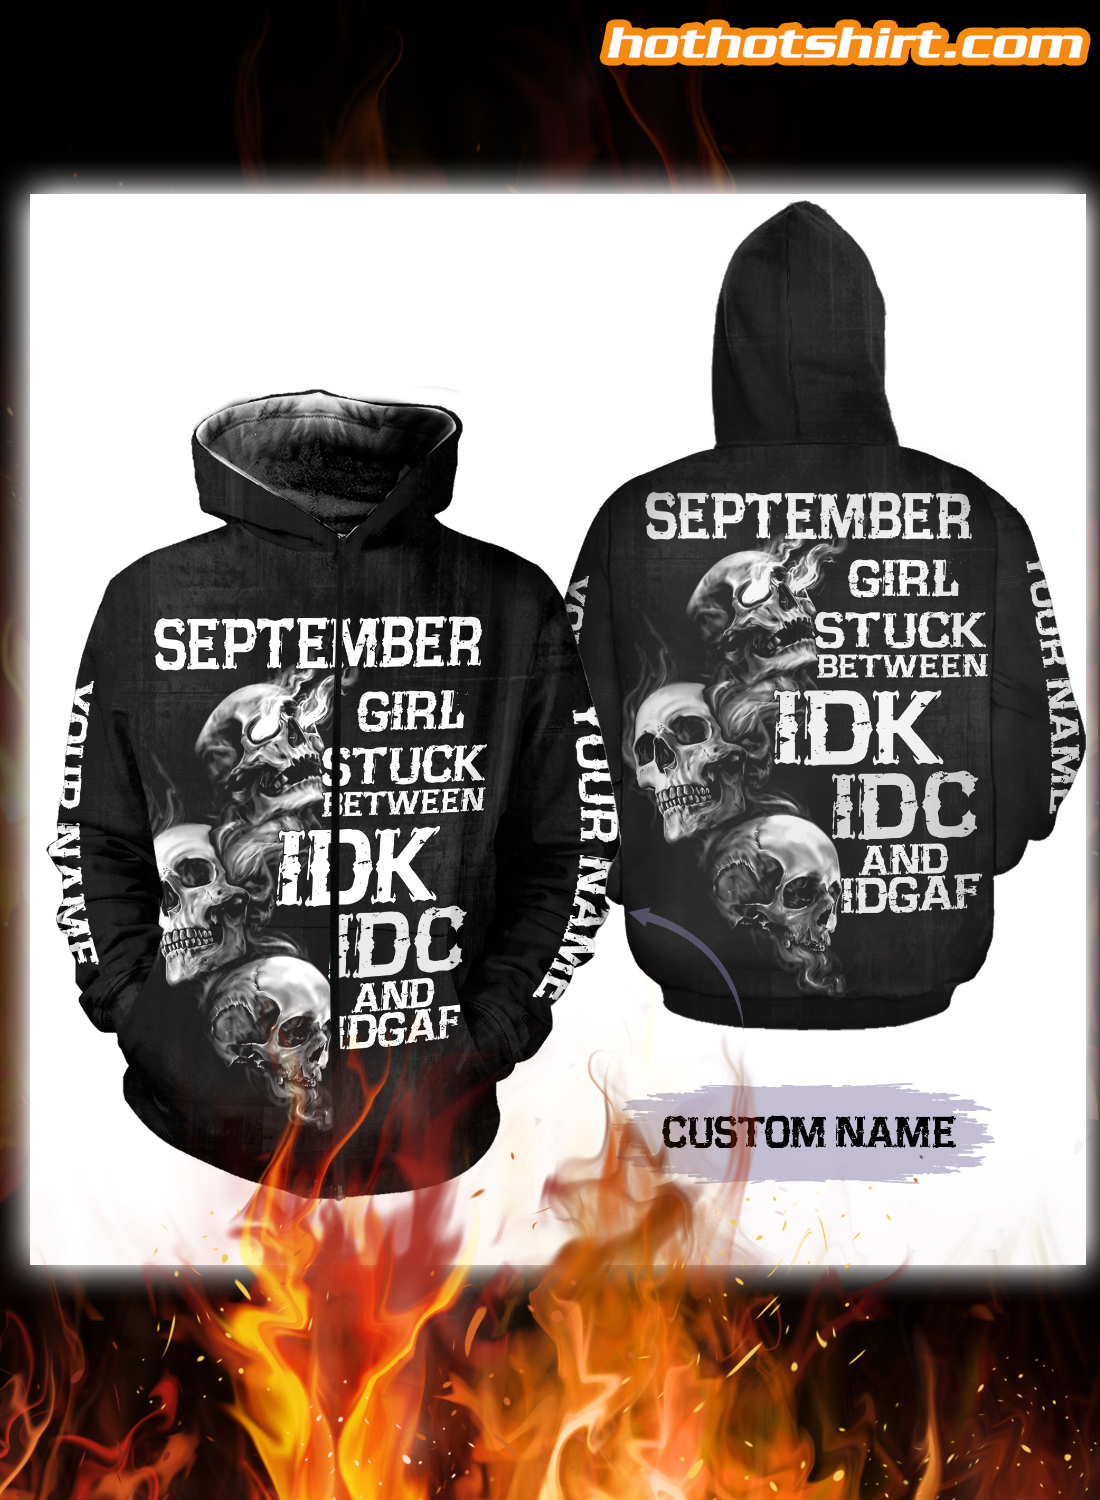 Personalized name september girl stuck between idk idc and idgaf 3D Hoodie and legging 1